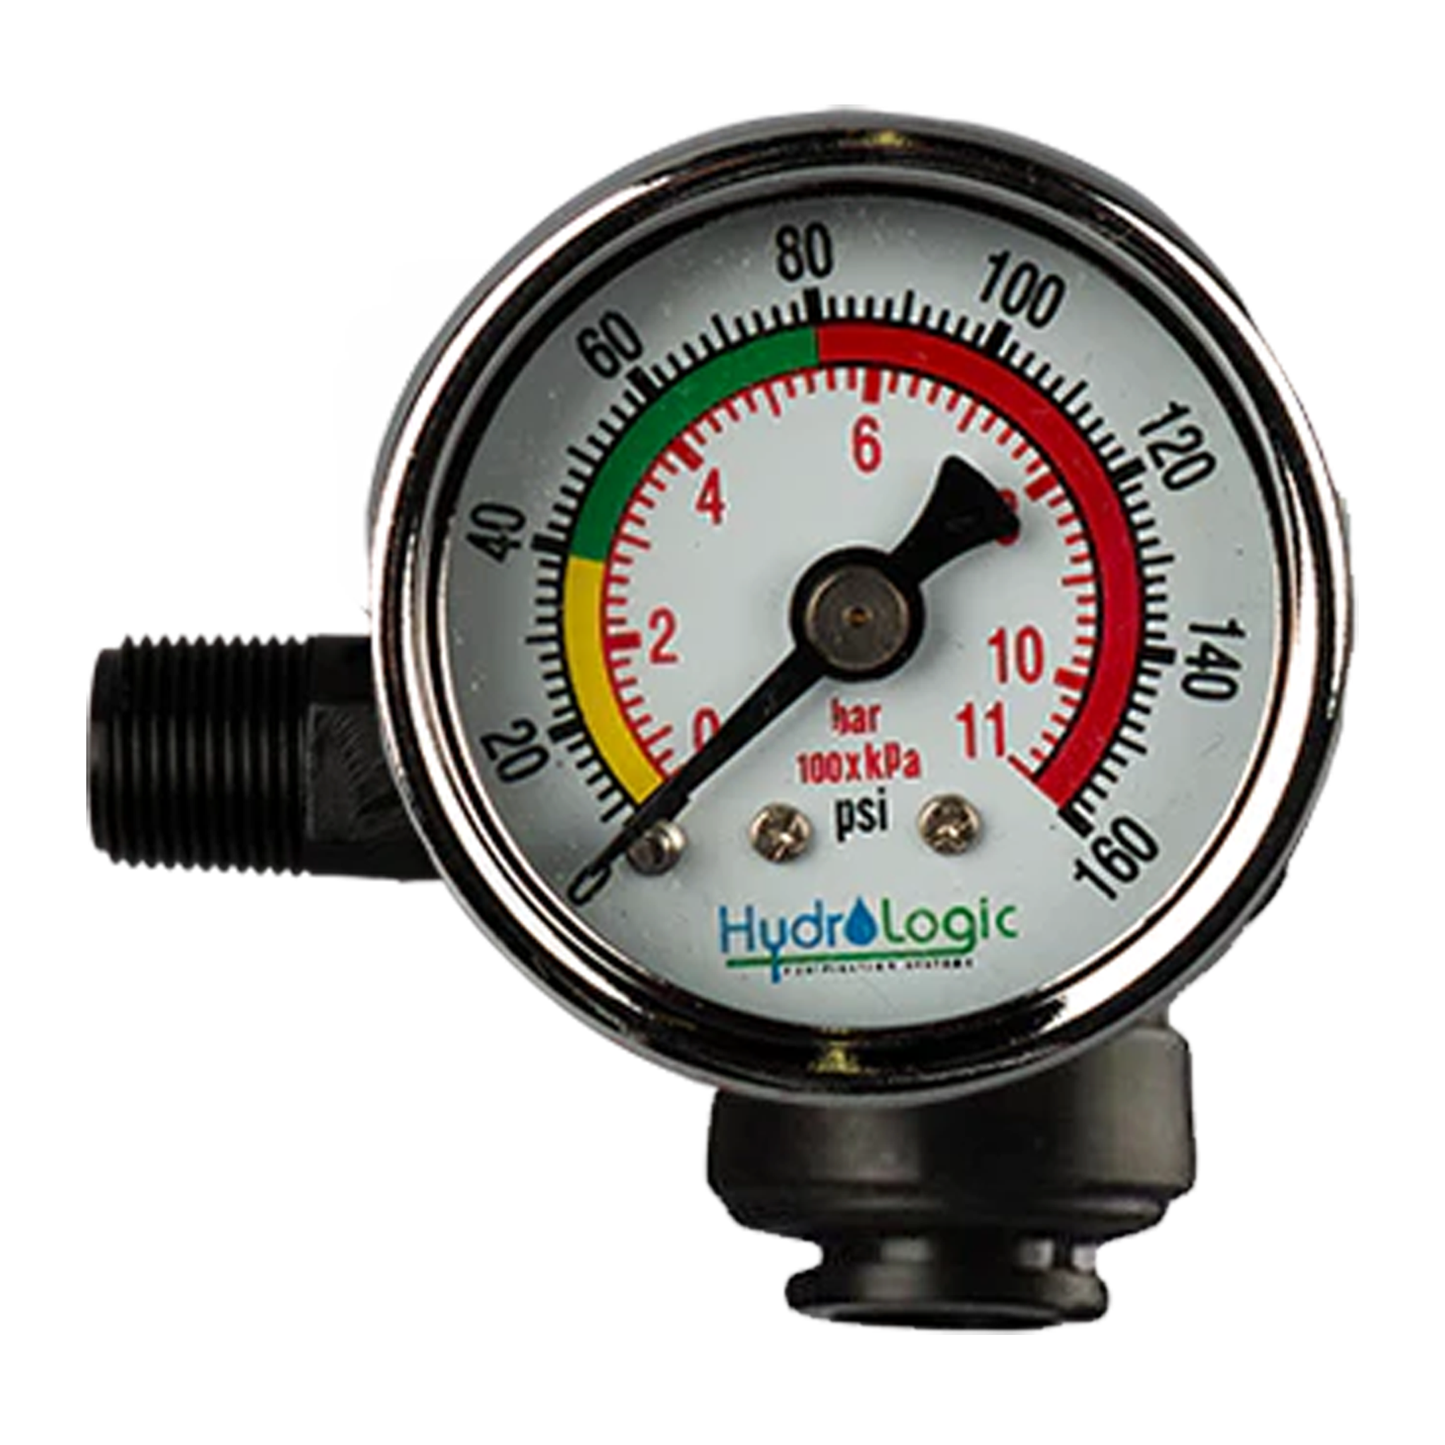 Hydrologic stealth RO 100/200 Pressure Gauge/Fitting Assembly